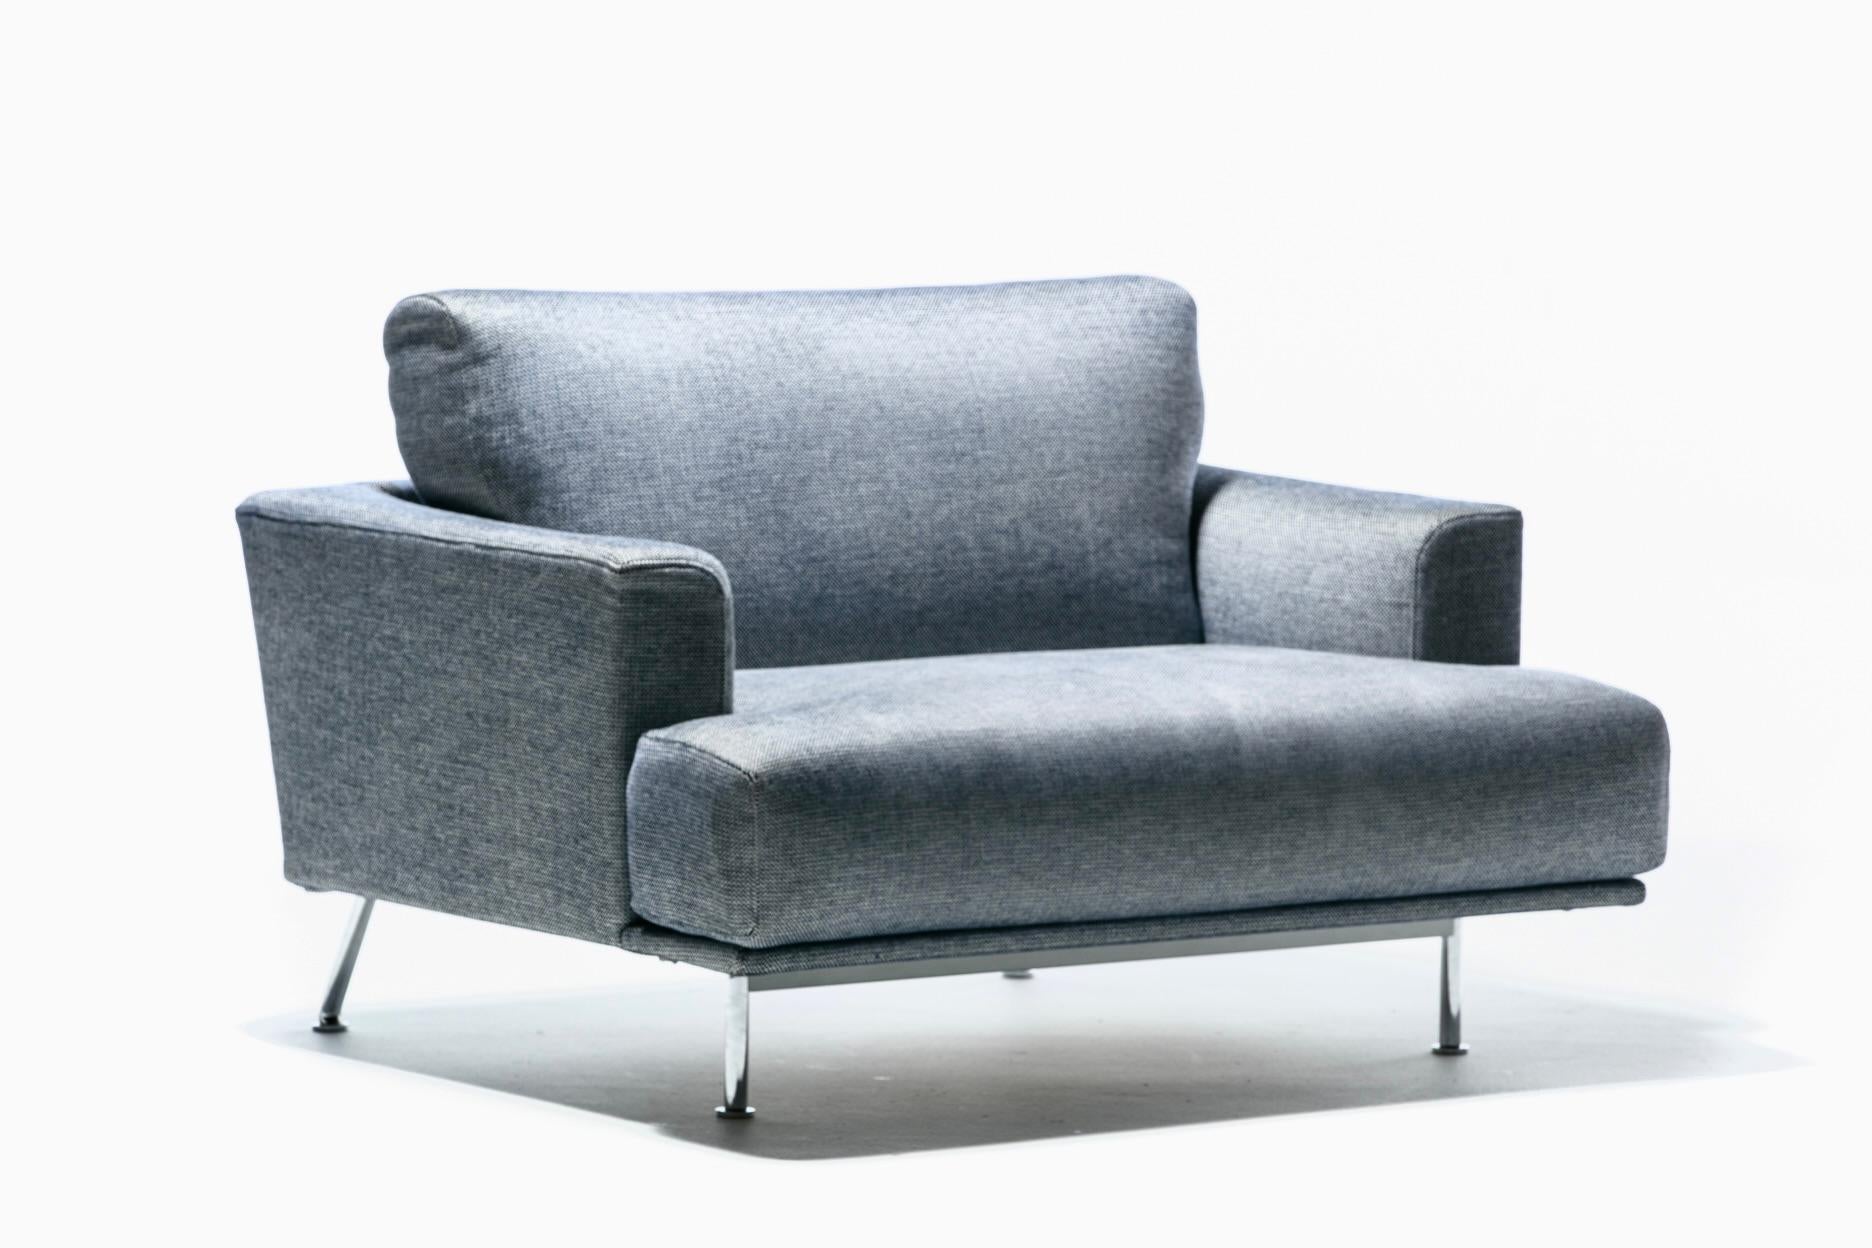 Pair of Imported Italian Modern Cassina 253 Nest Lounge Chairs by Piero Lissoni  For Sale 6